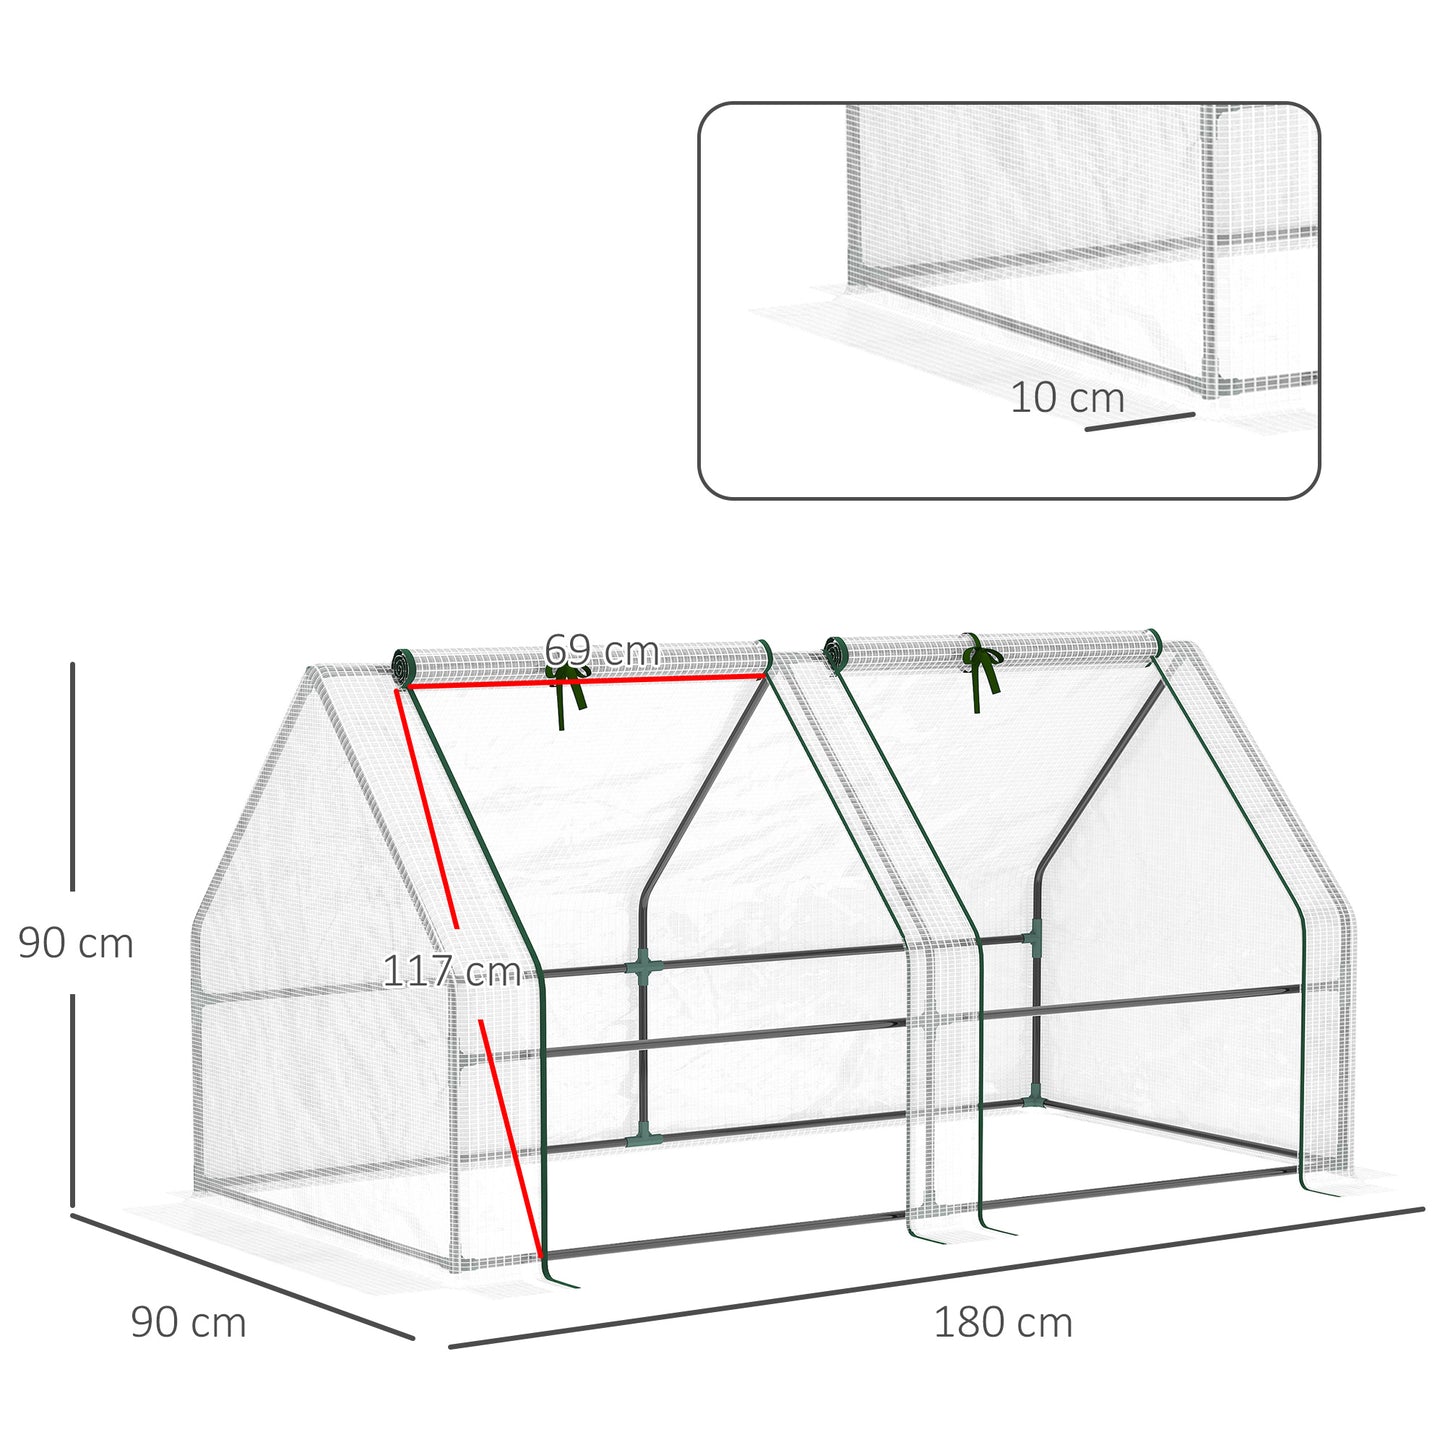 Outsunny Compact Cultivator: Petite Greenhouse with Steel Frame, PE Cover & Zippered Window for Nurturing Plants, Pristine White